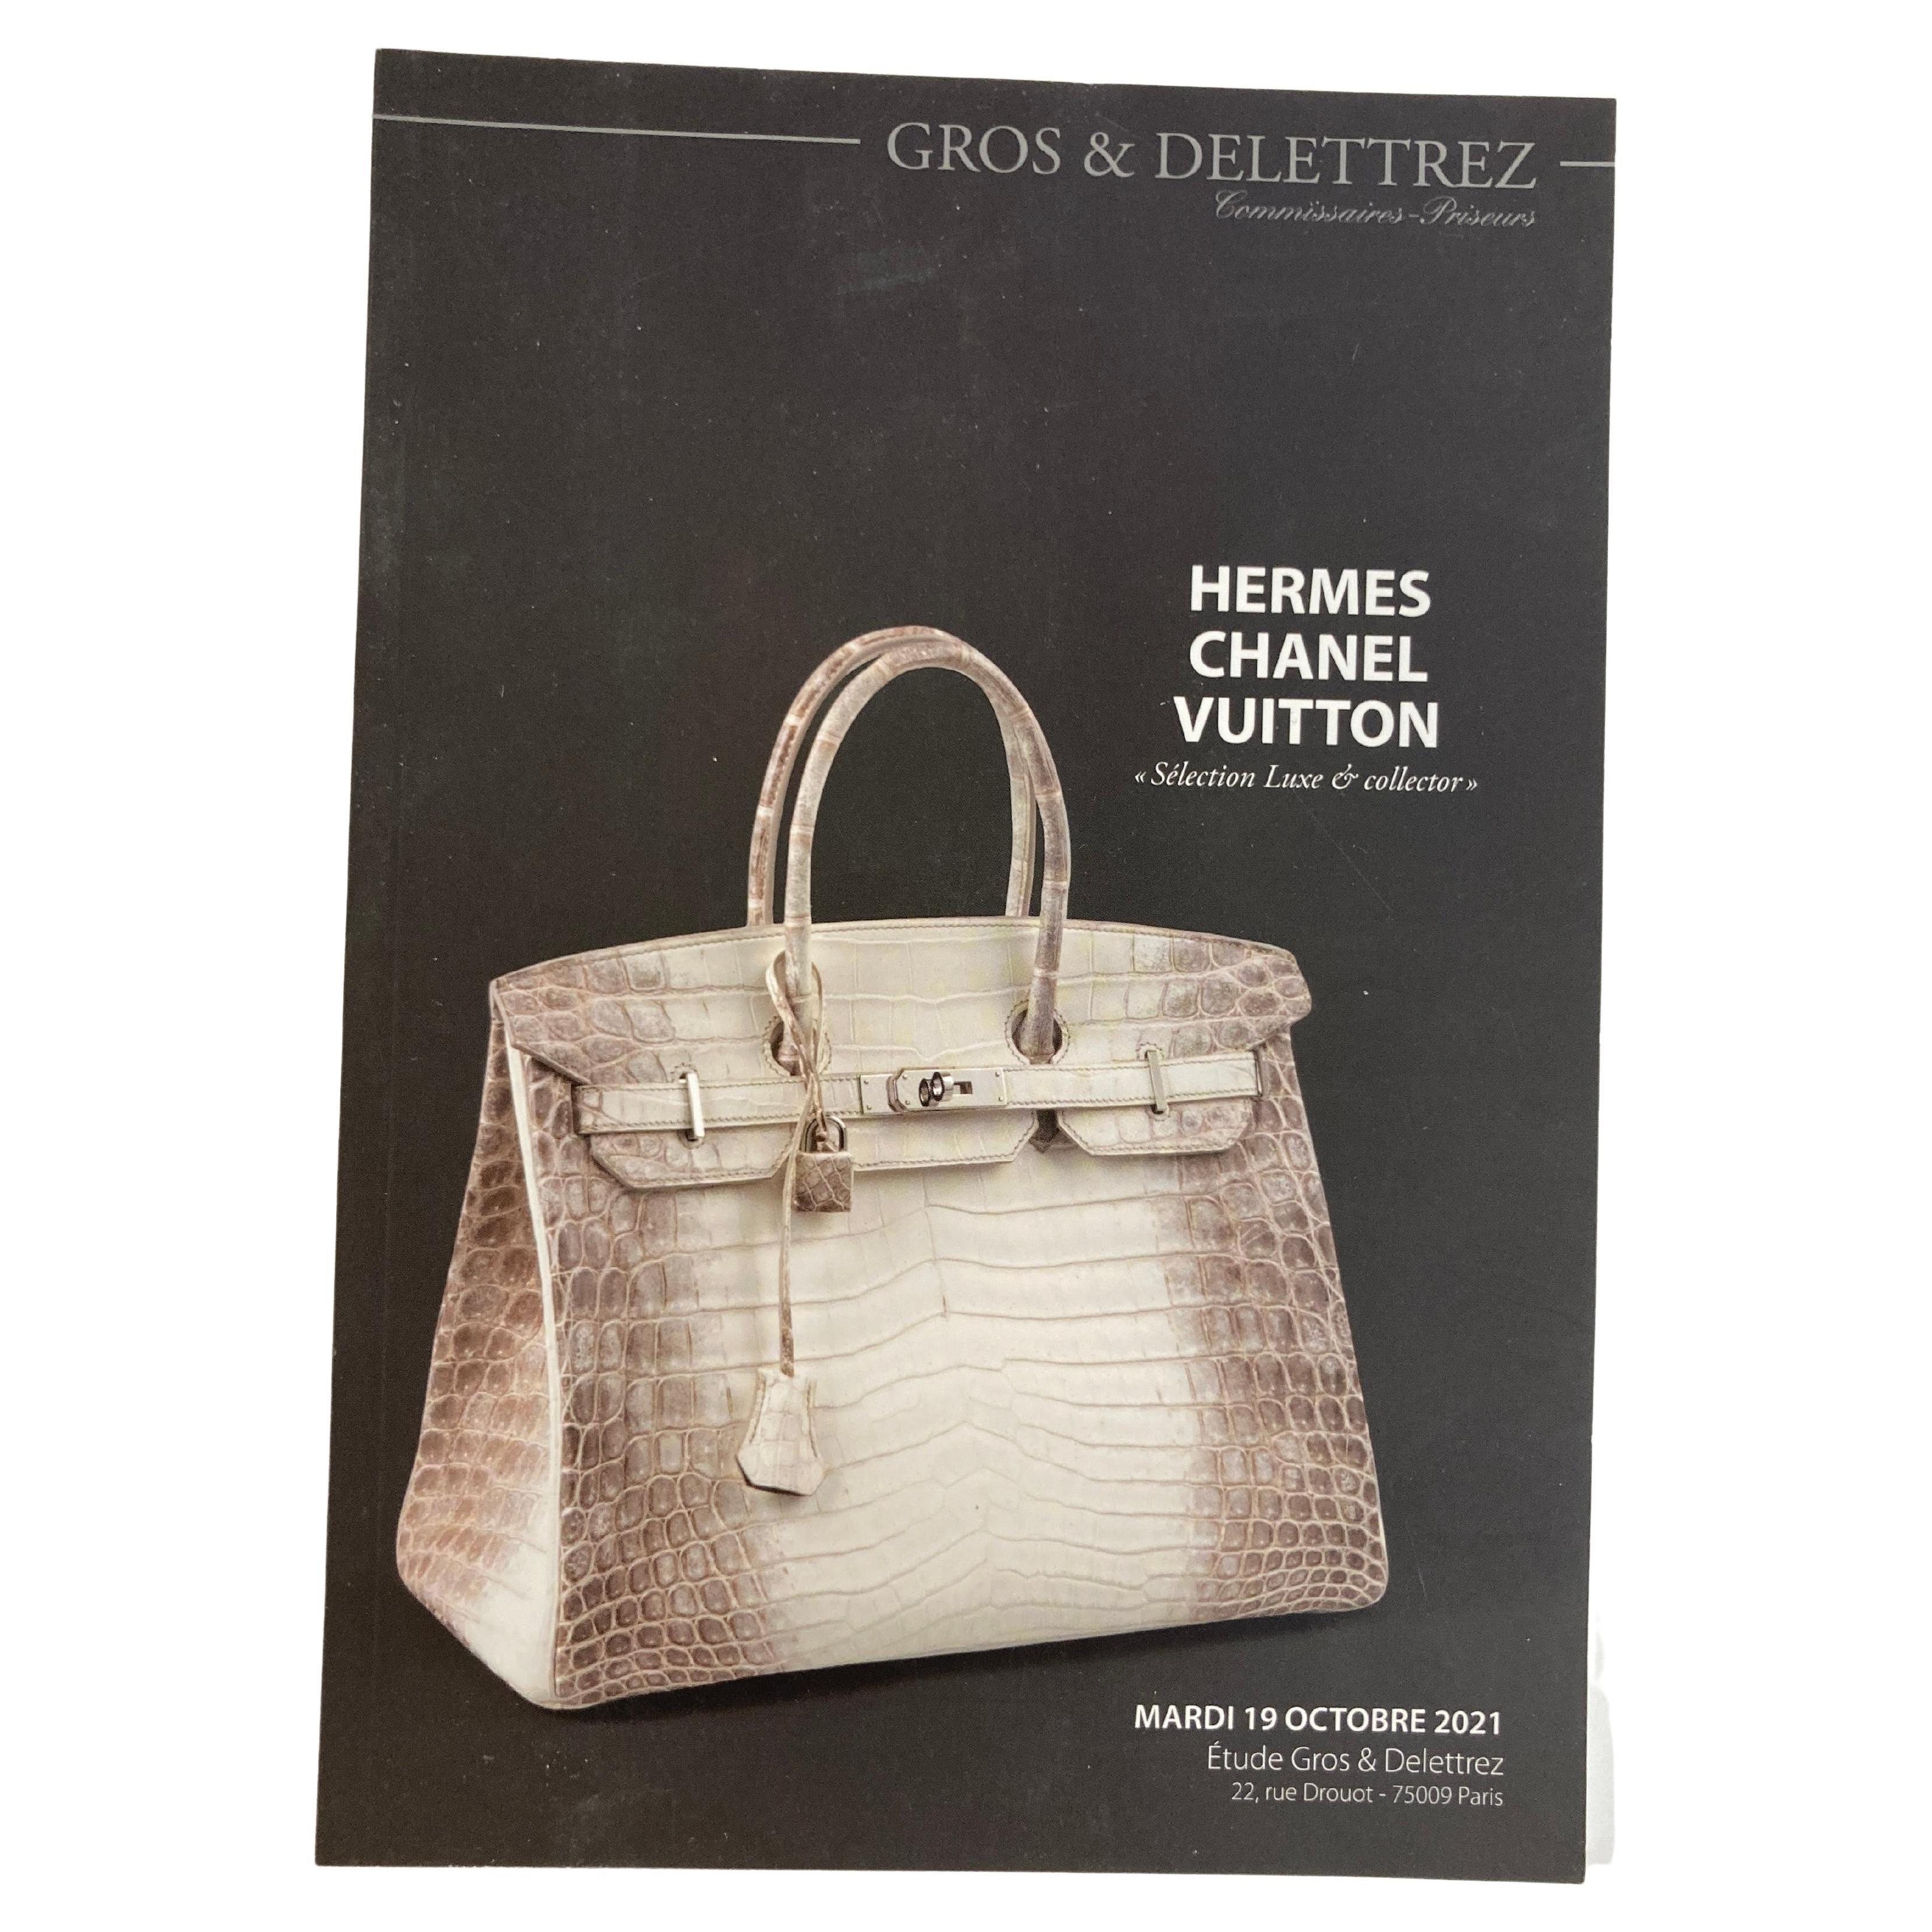 Hermes Chanel Vuitton Luxe Collector Auction Catalog 2021 by Gros & Delettrez